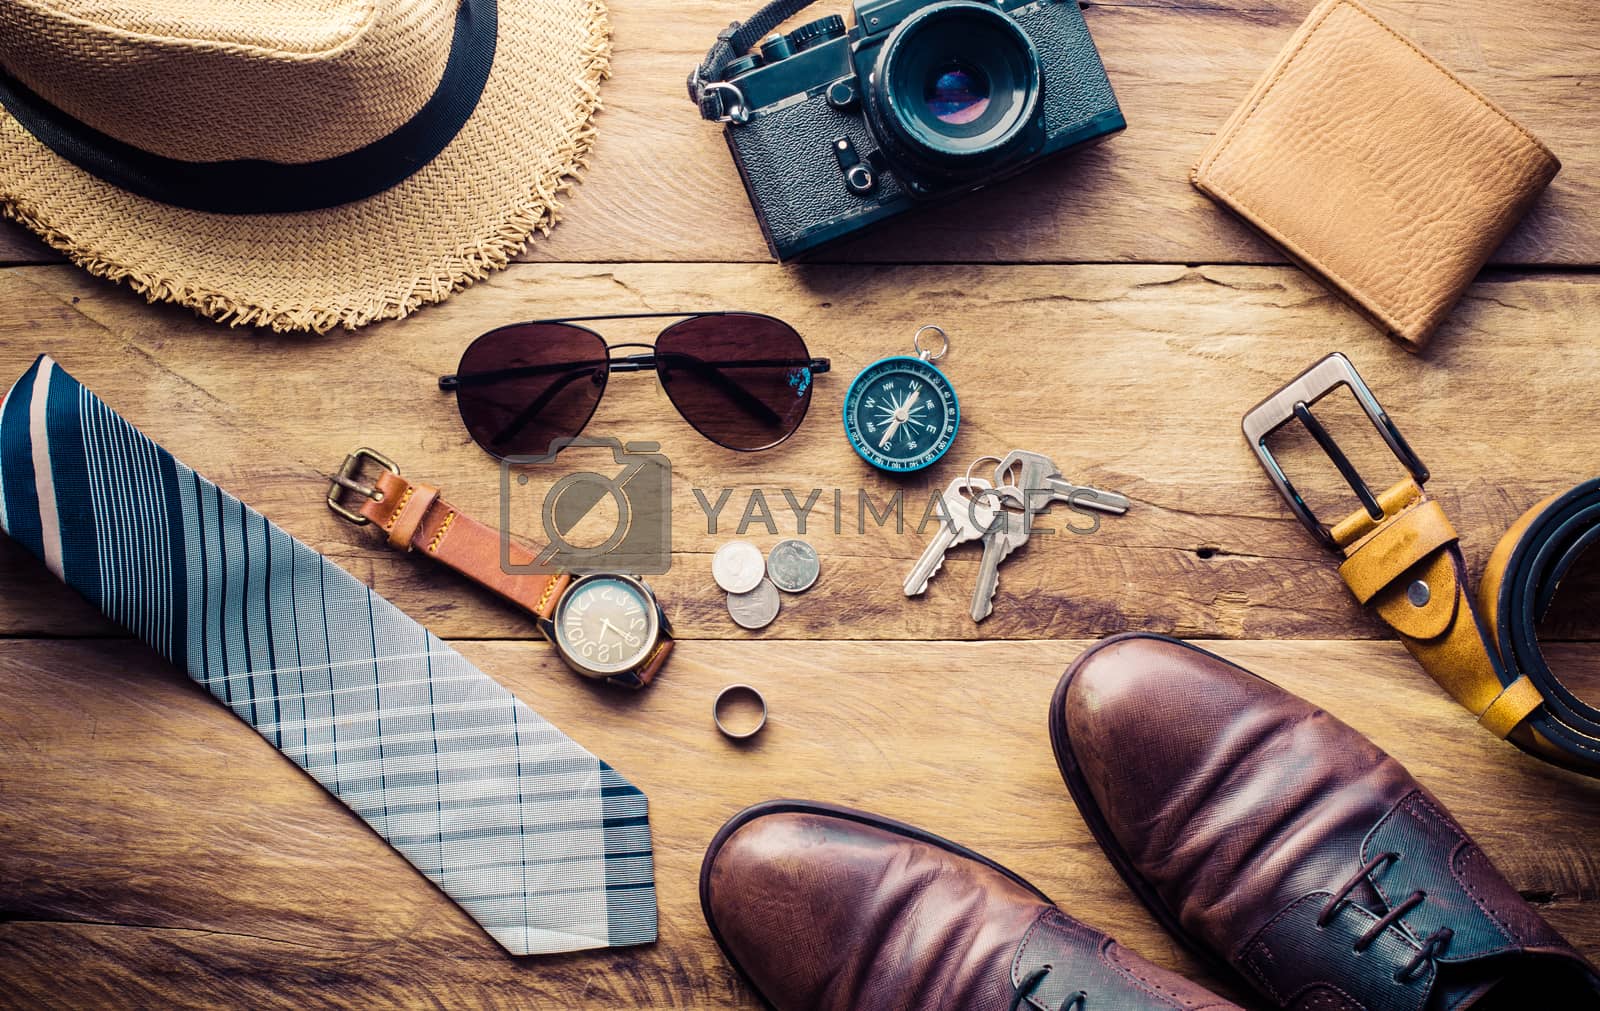 Royalty free image of Travel Clothing accessories Apparel along for the trip by photobyphotoboy